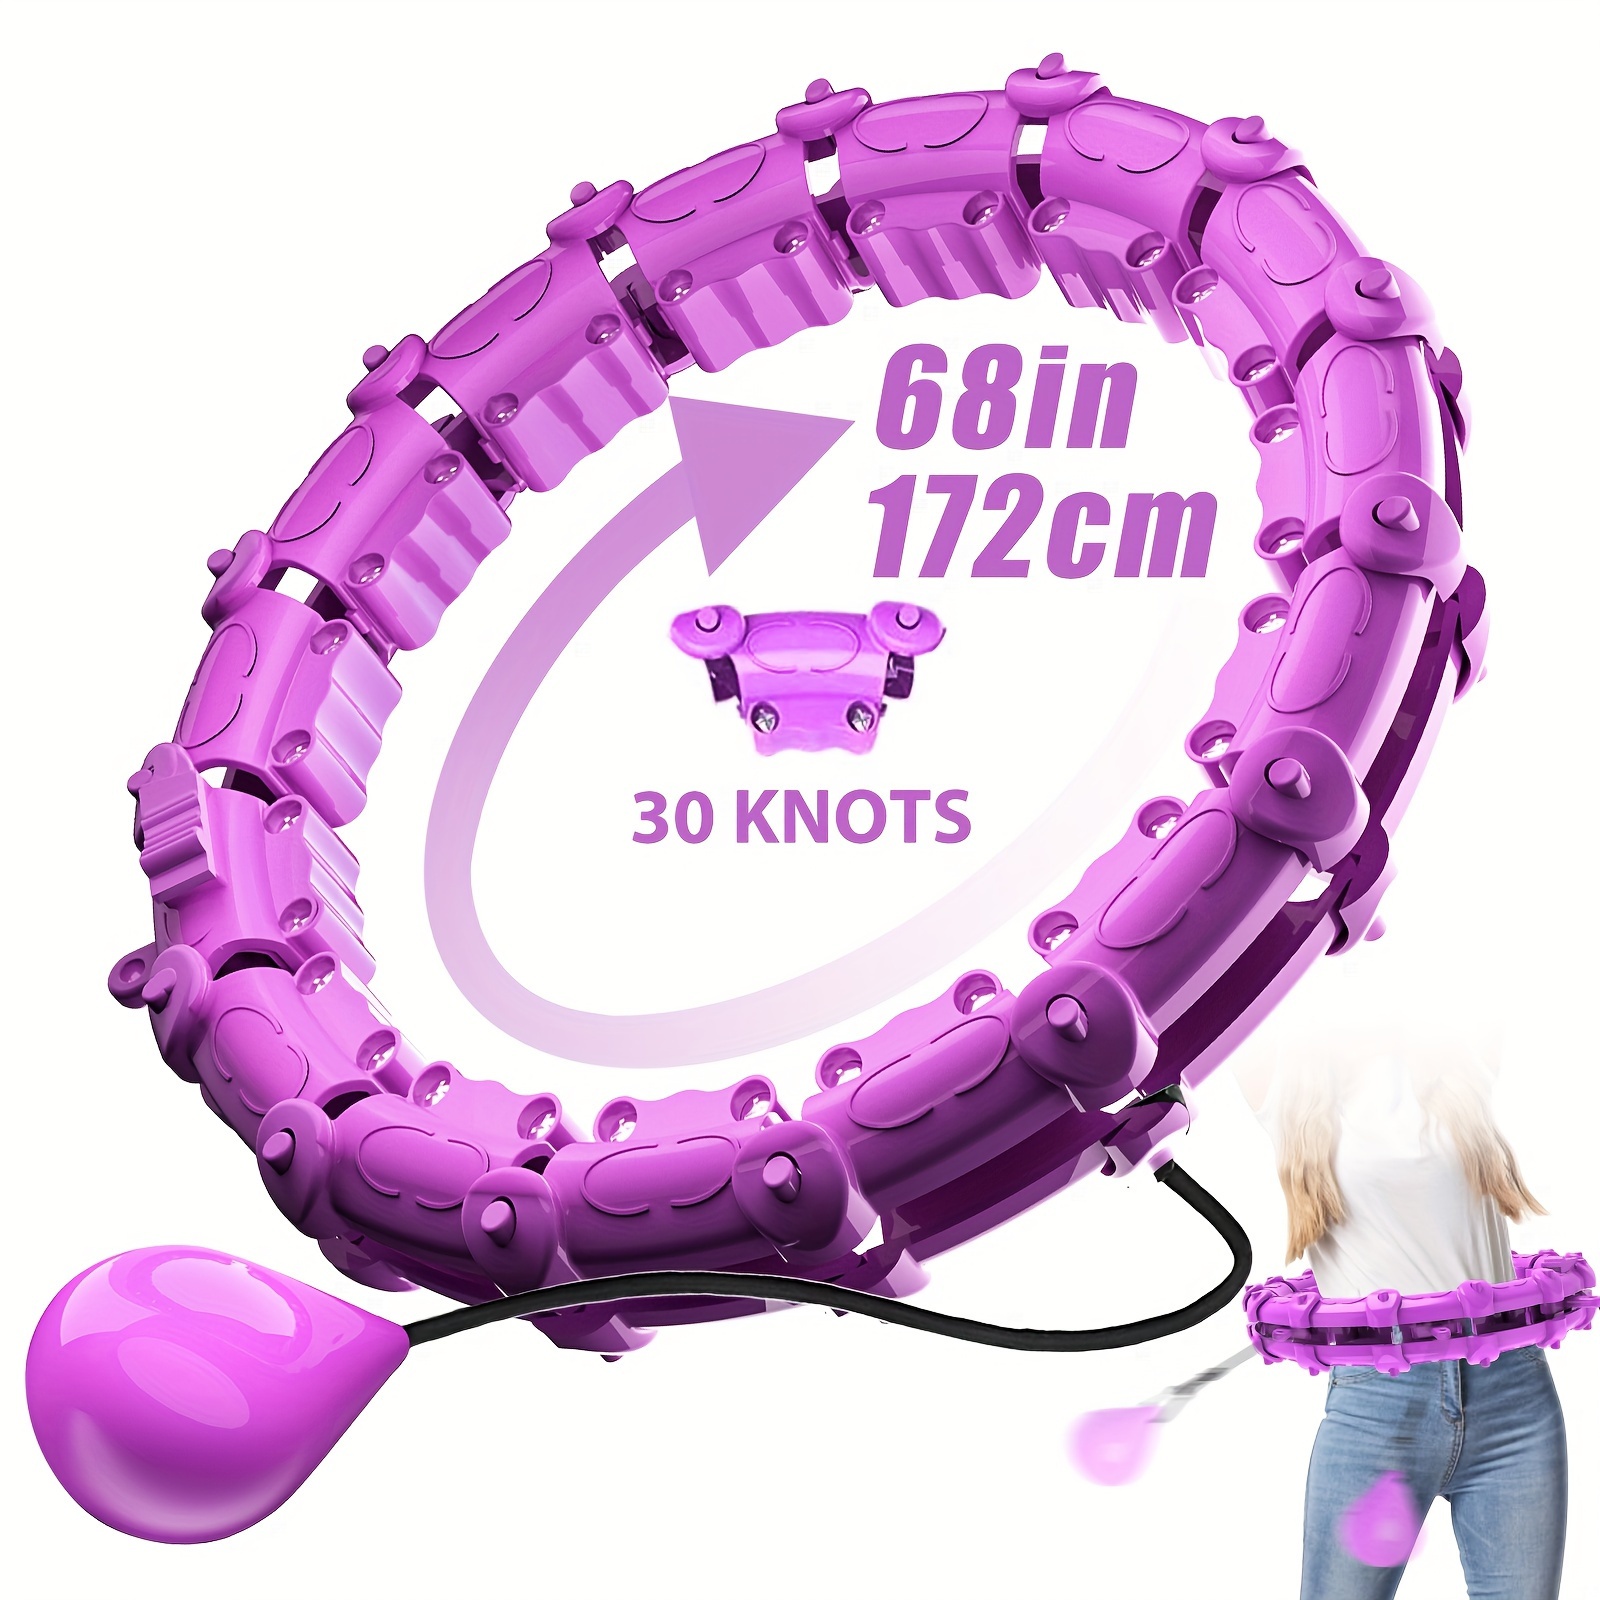 66FIT WEIGHTED HULA HOOPS - WAVE DESIGN TO BOOST CORE MUSCLE STRENGTH